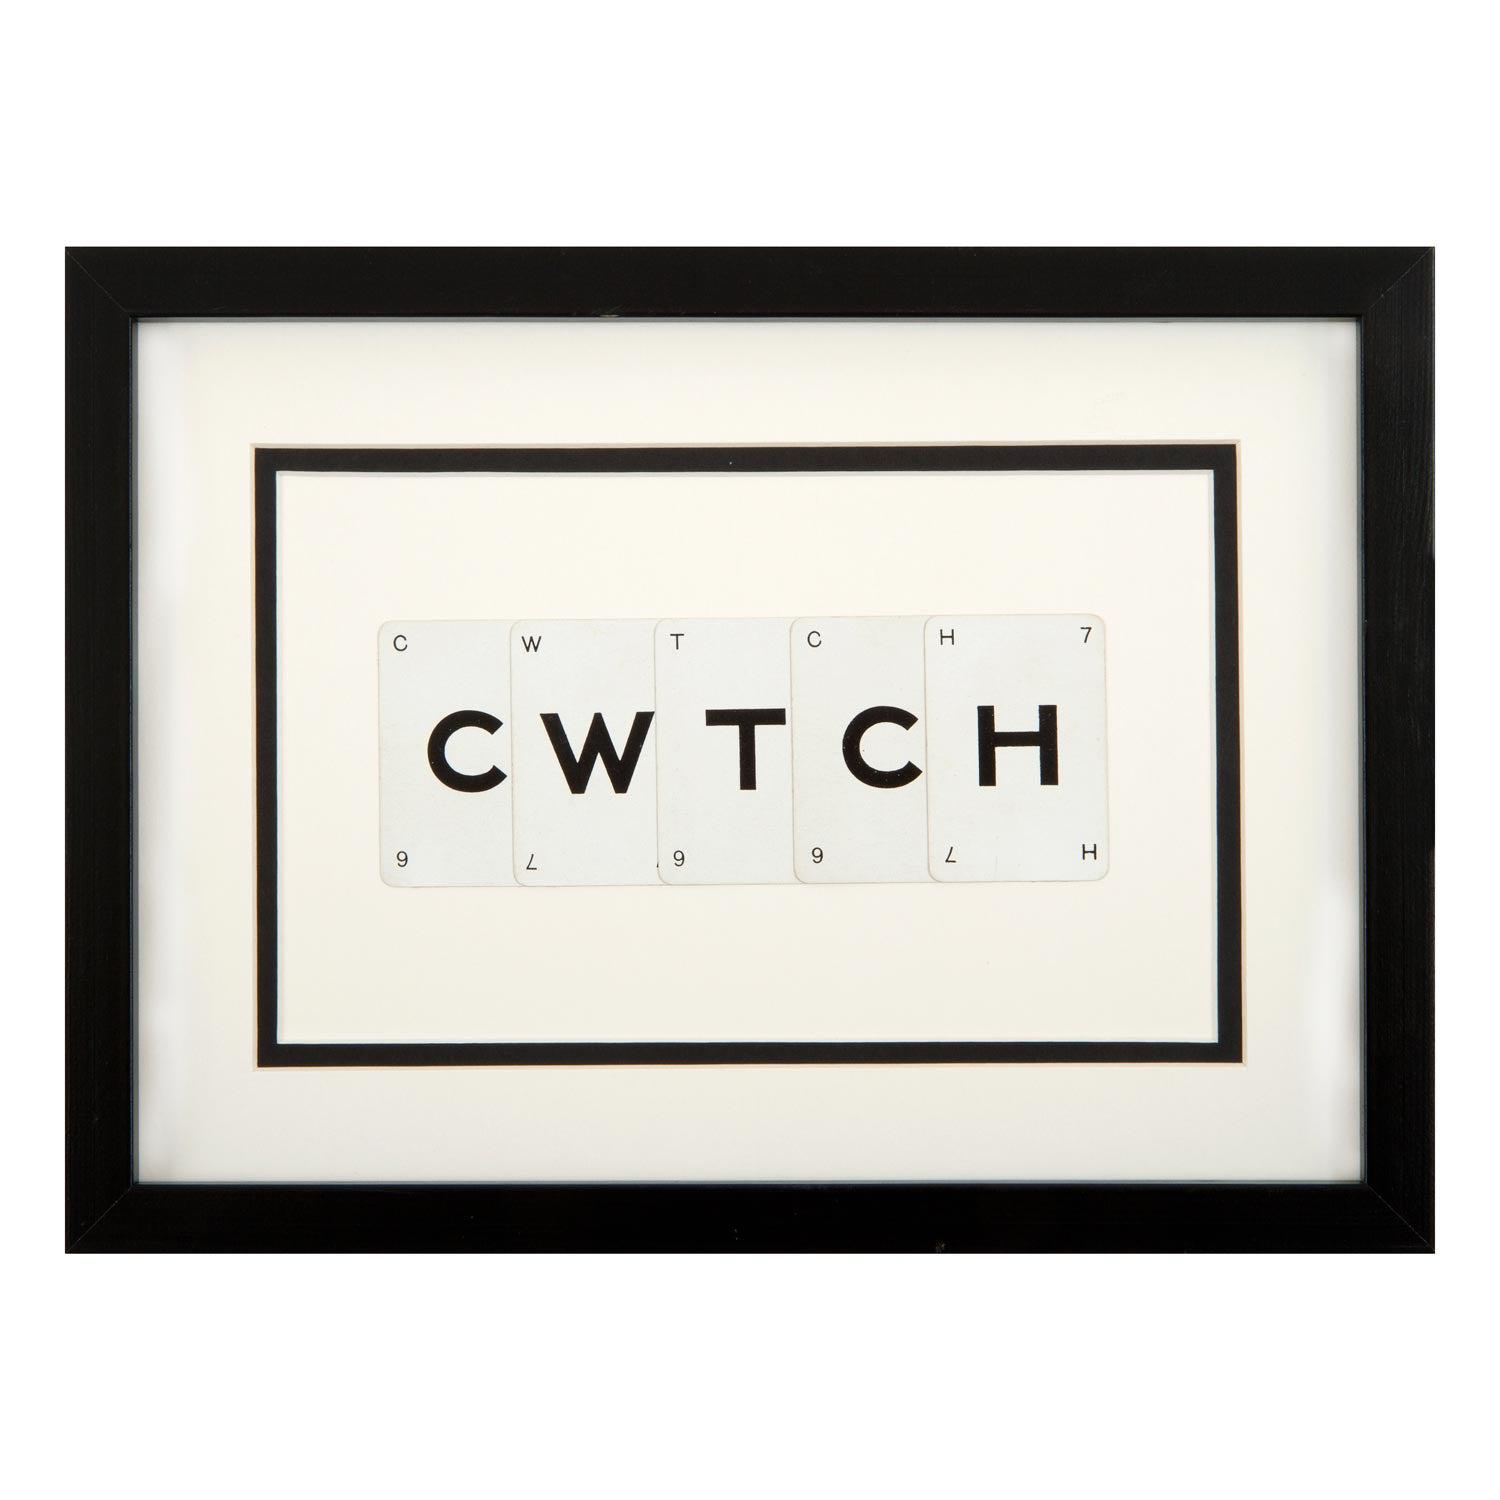 Picture - Vintage Playing Cards - Cwtch / Cuddle